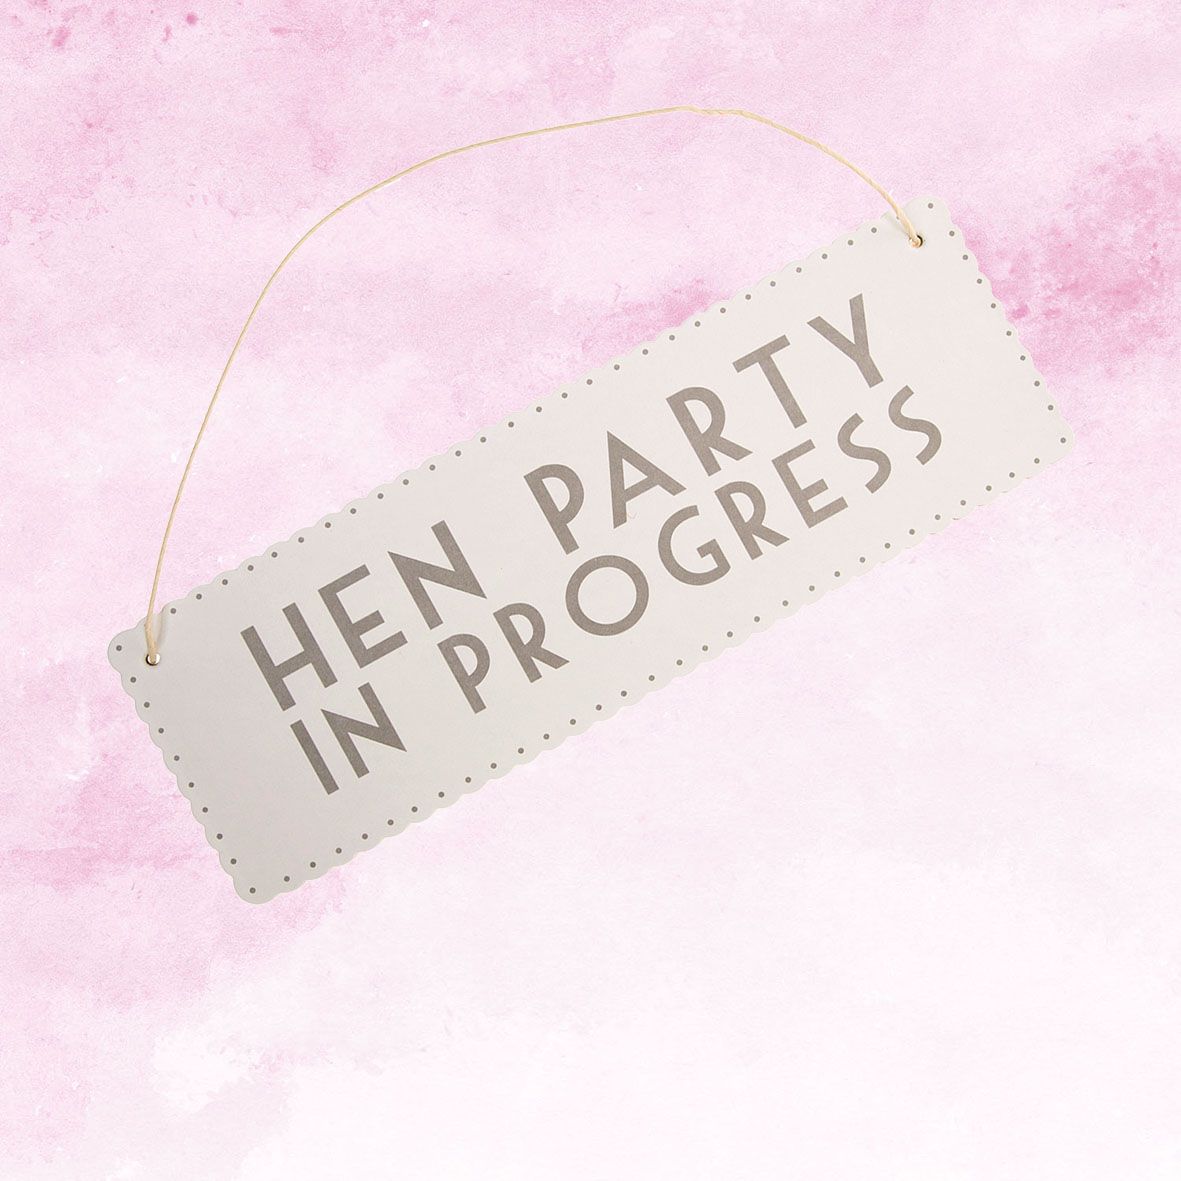 Hen Party Gifts category image